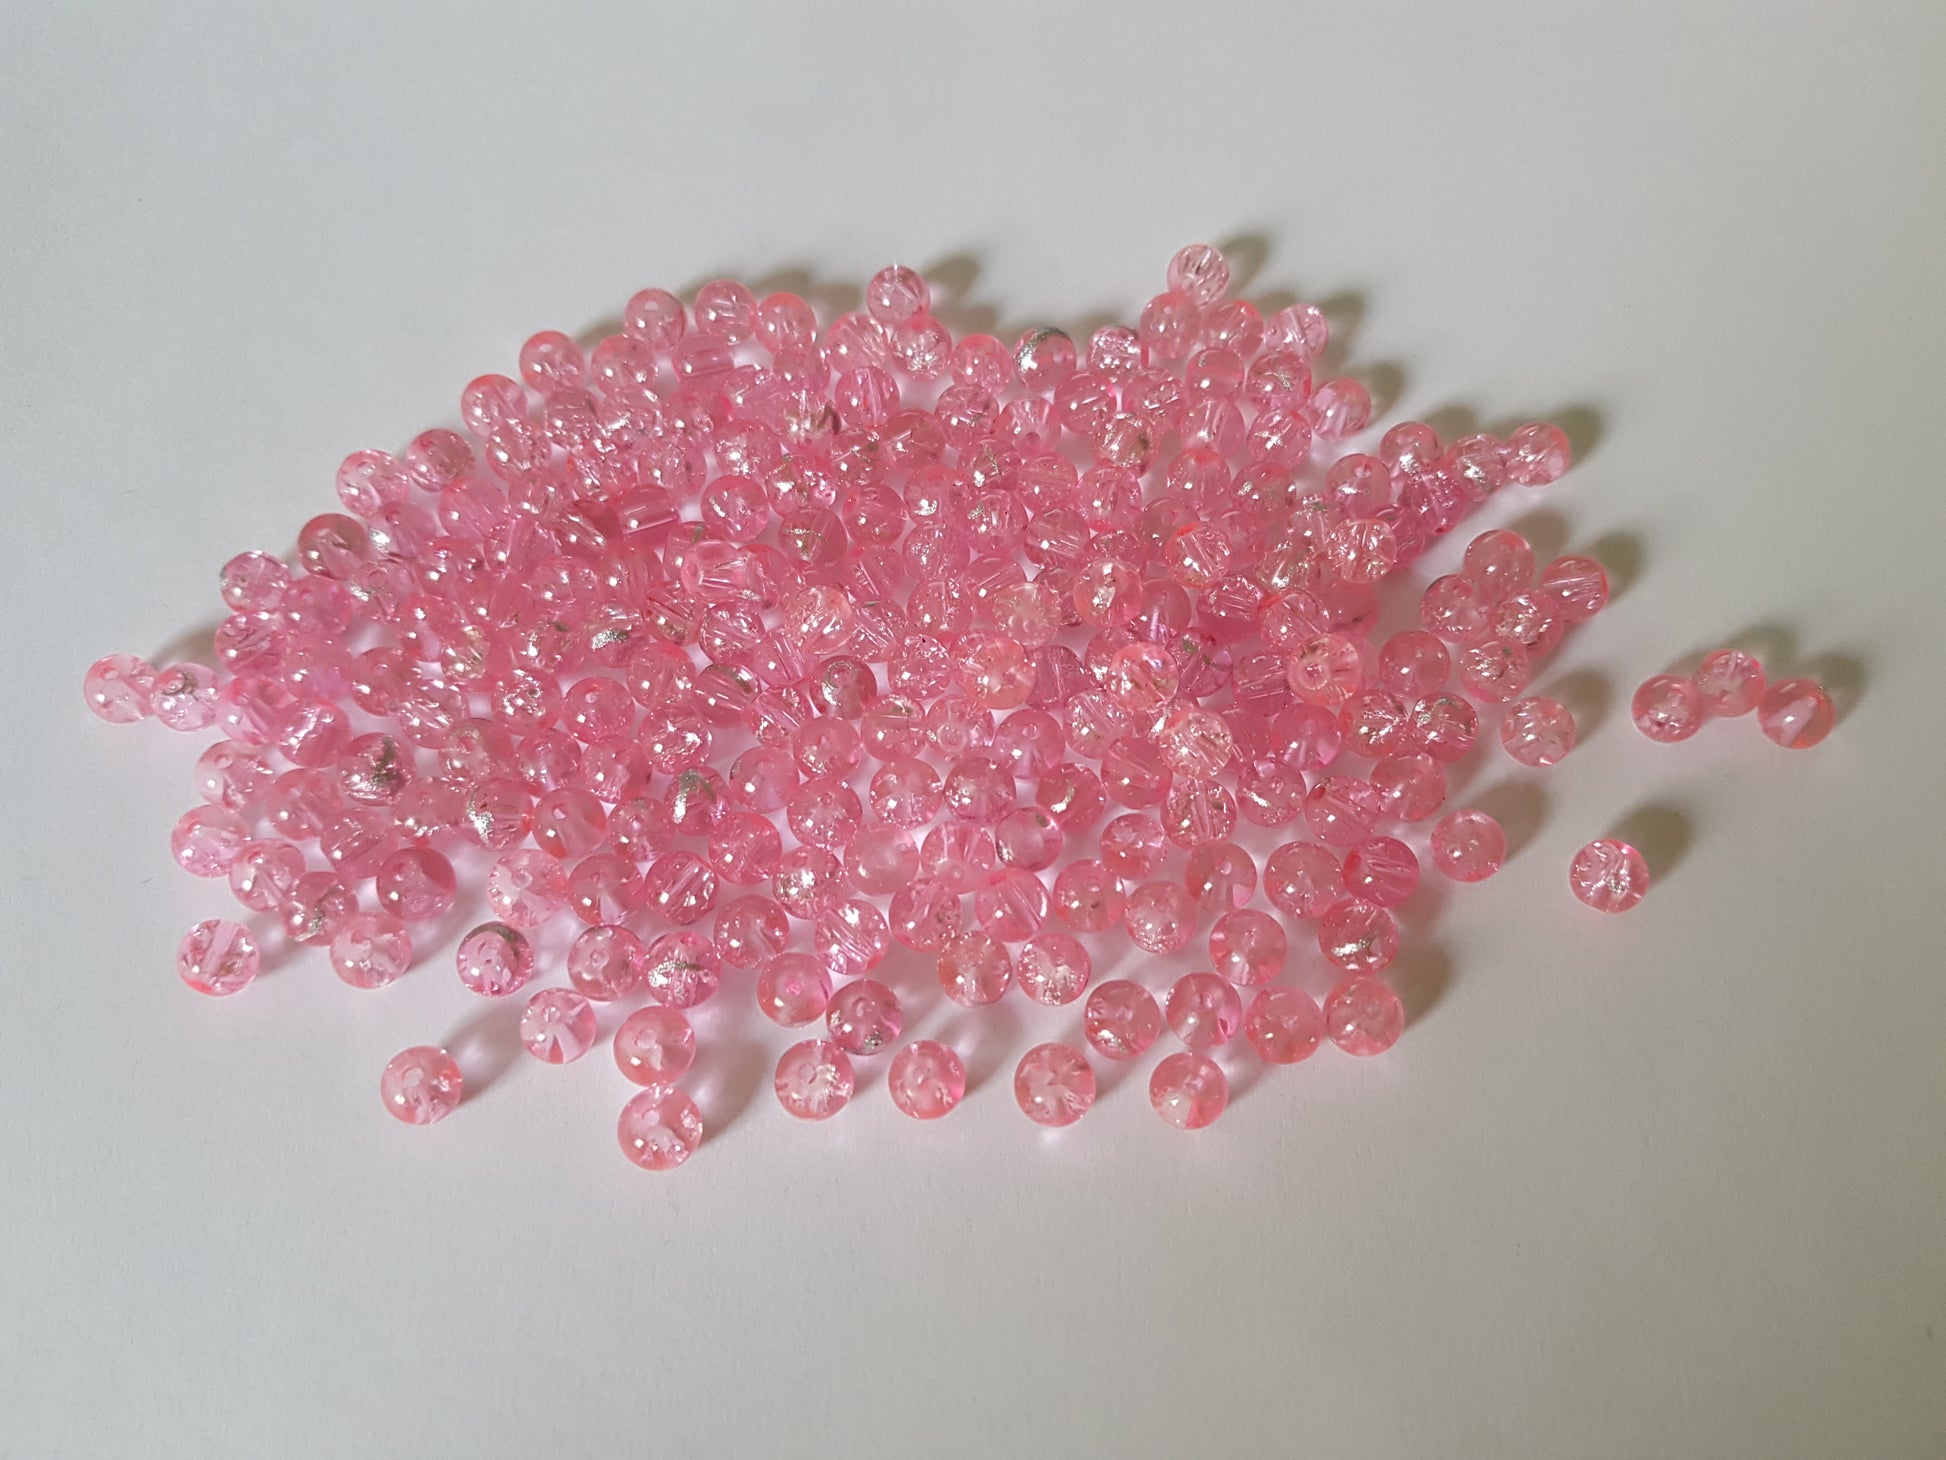 6mm drawbench crackle beads - pink